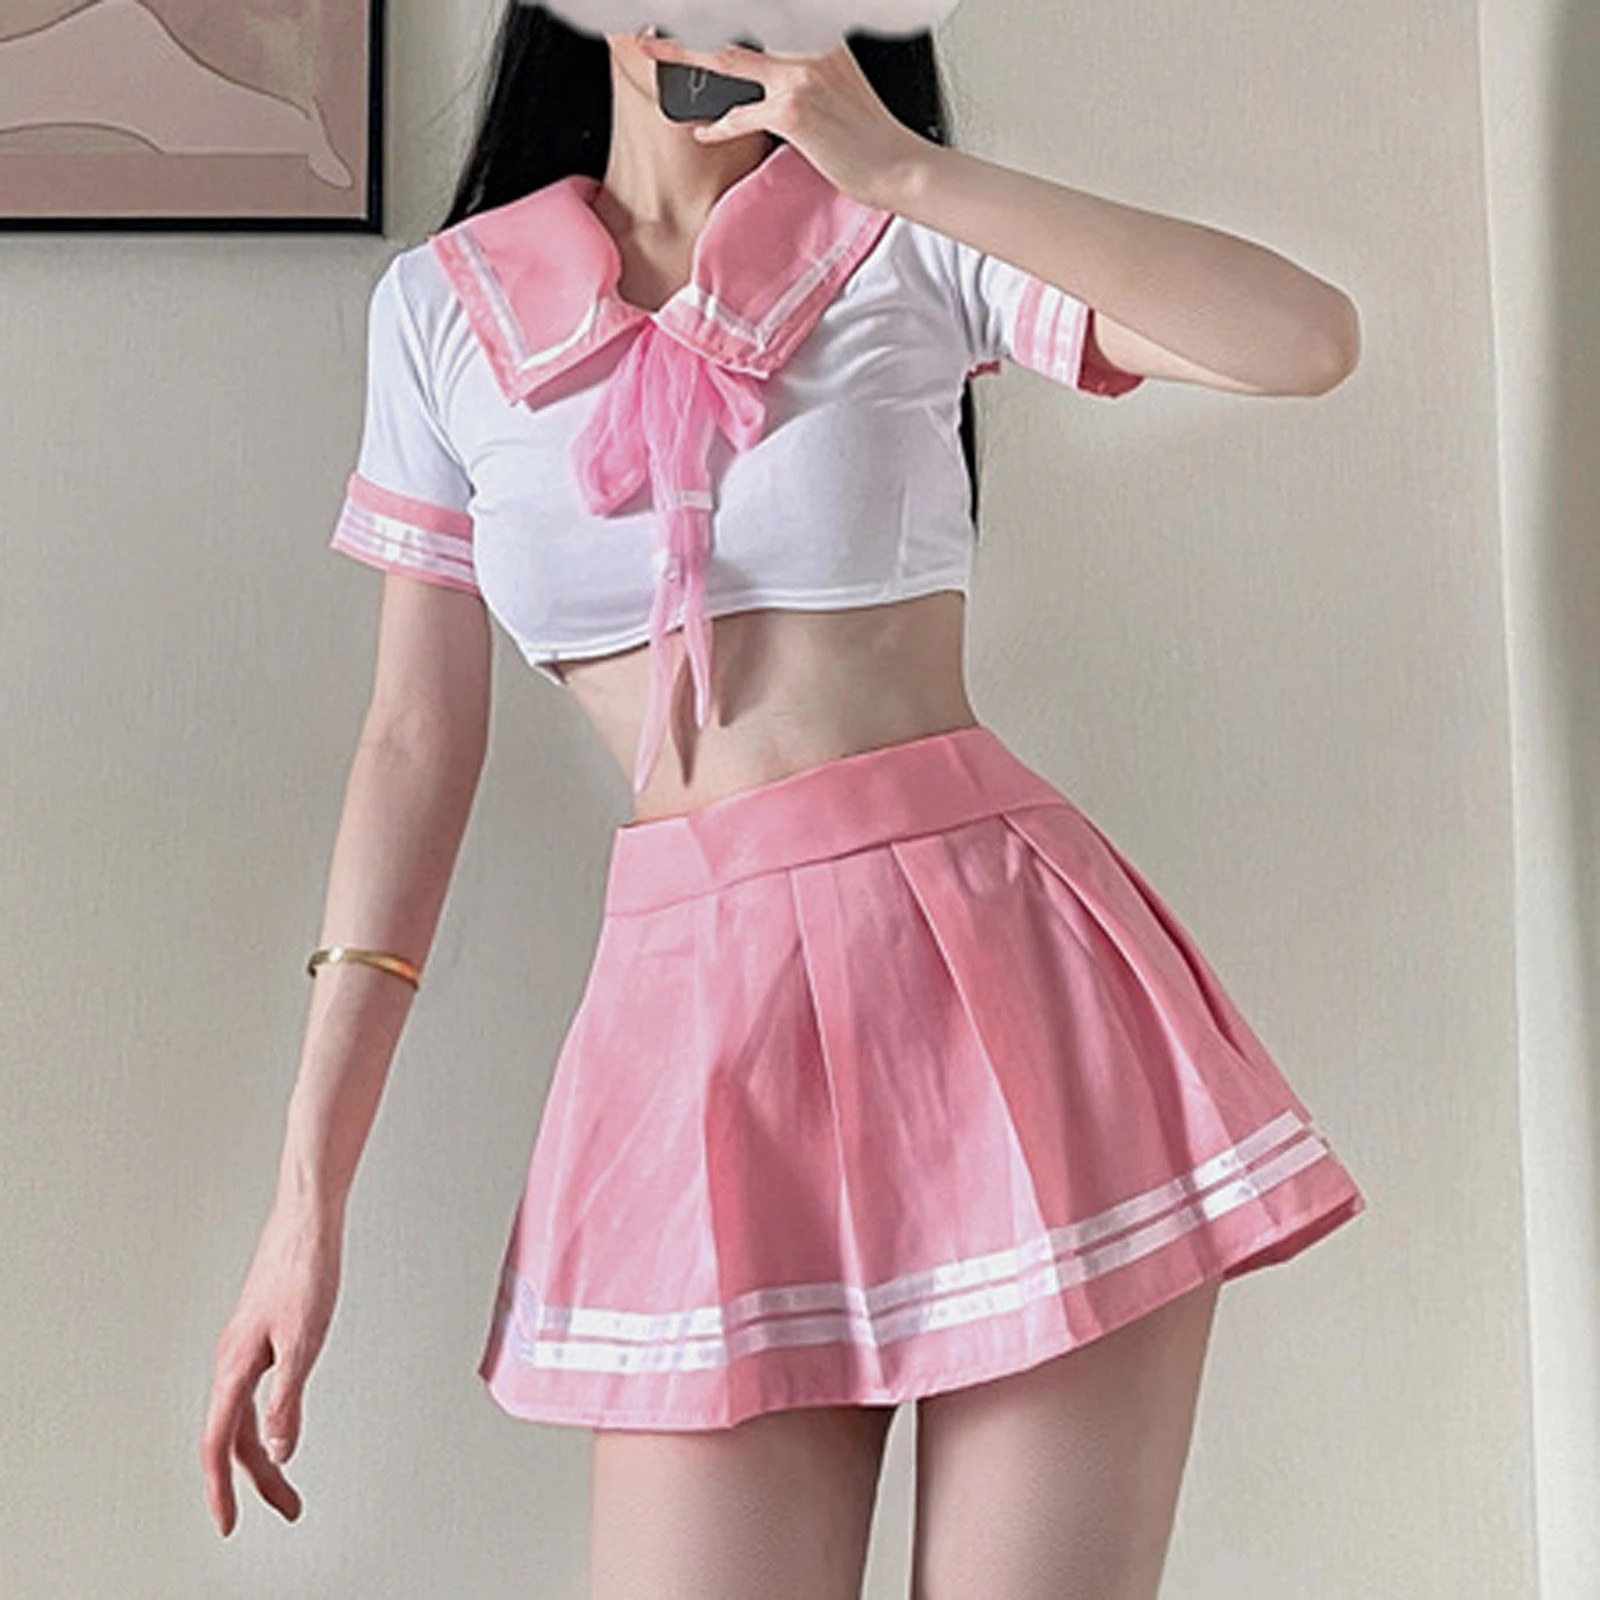 Woman Suit Porn - Sexy Women Lingerie Performance Plaid Student Porn Uniform Cosplay Pleated  Skirt Babydoll Porno Suit Perspective Suit Lenceria - Exotic Costumes -  AliExpress